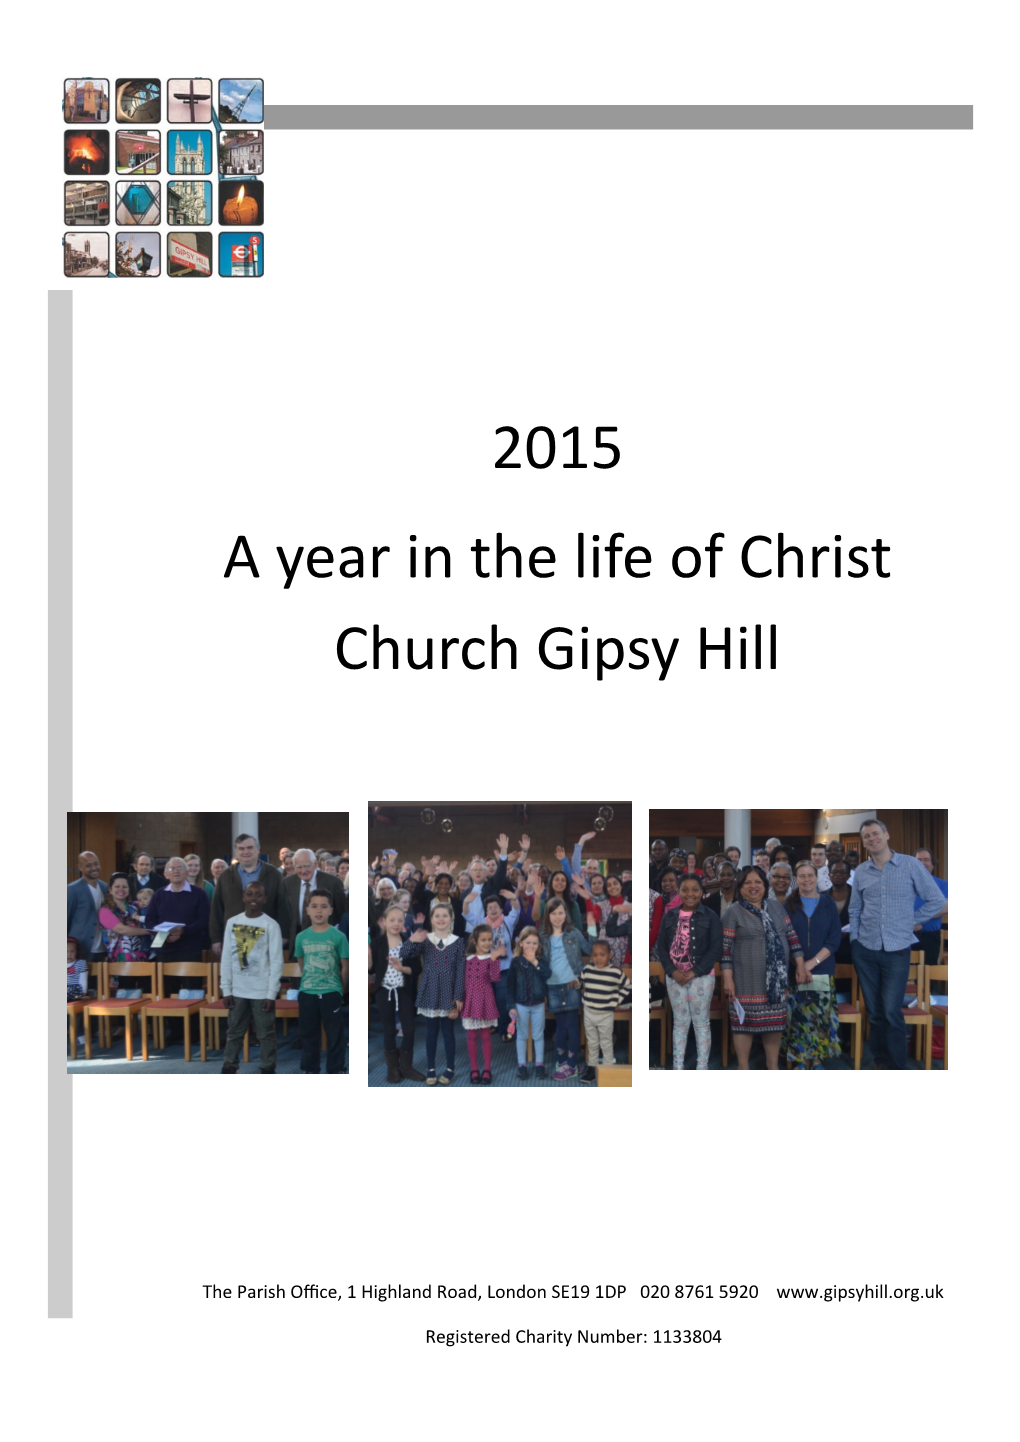 2015 a Year in the Life of Christ Church Gipsy Hill